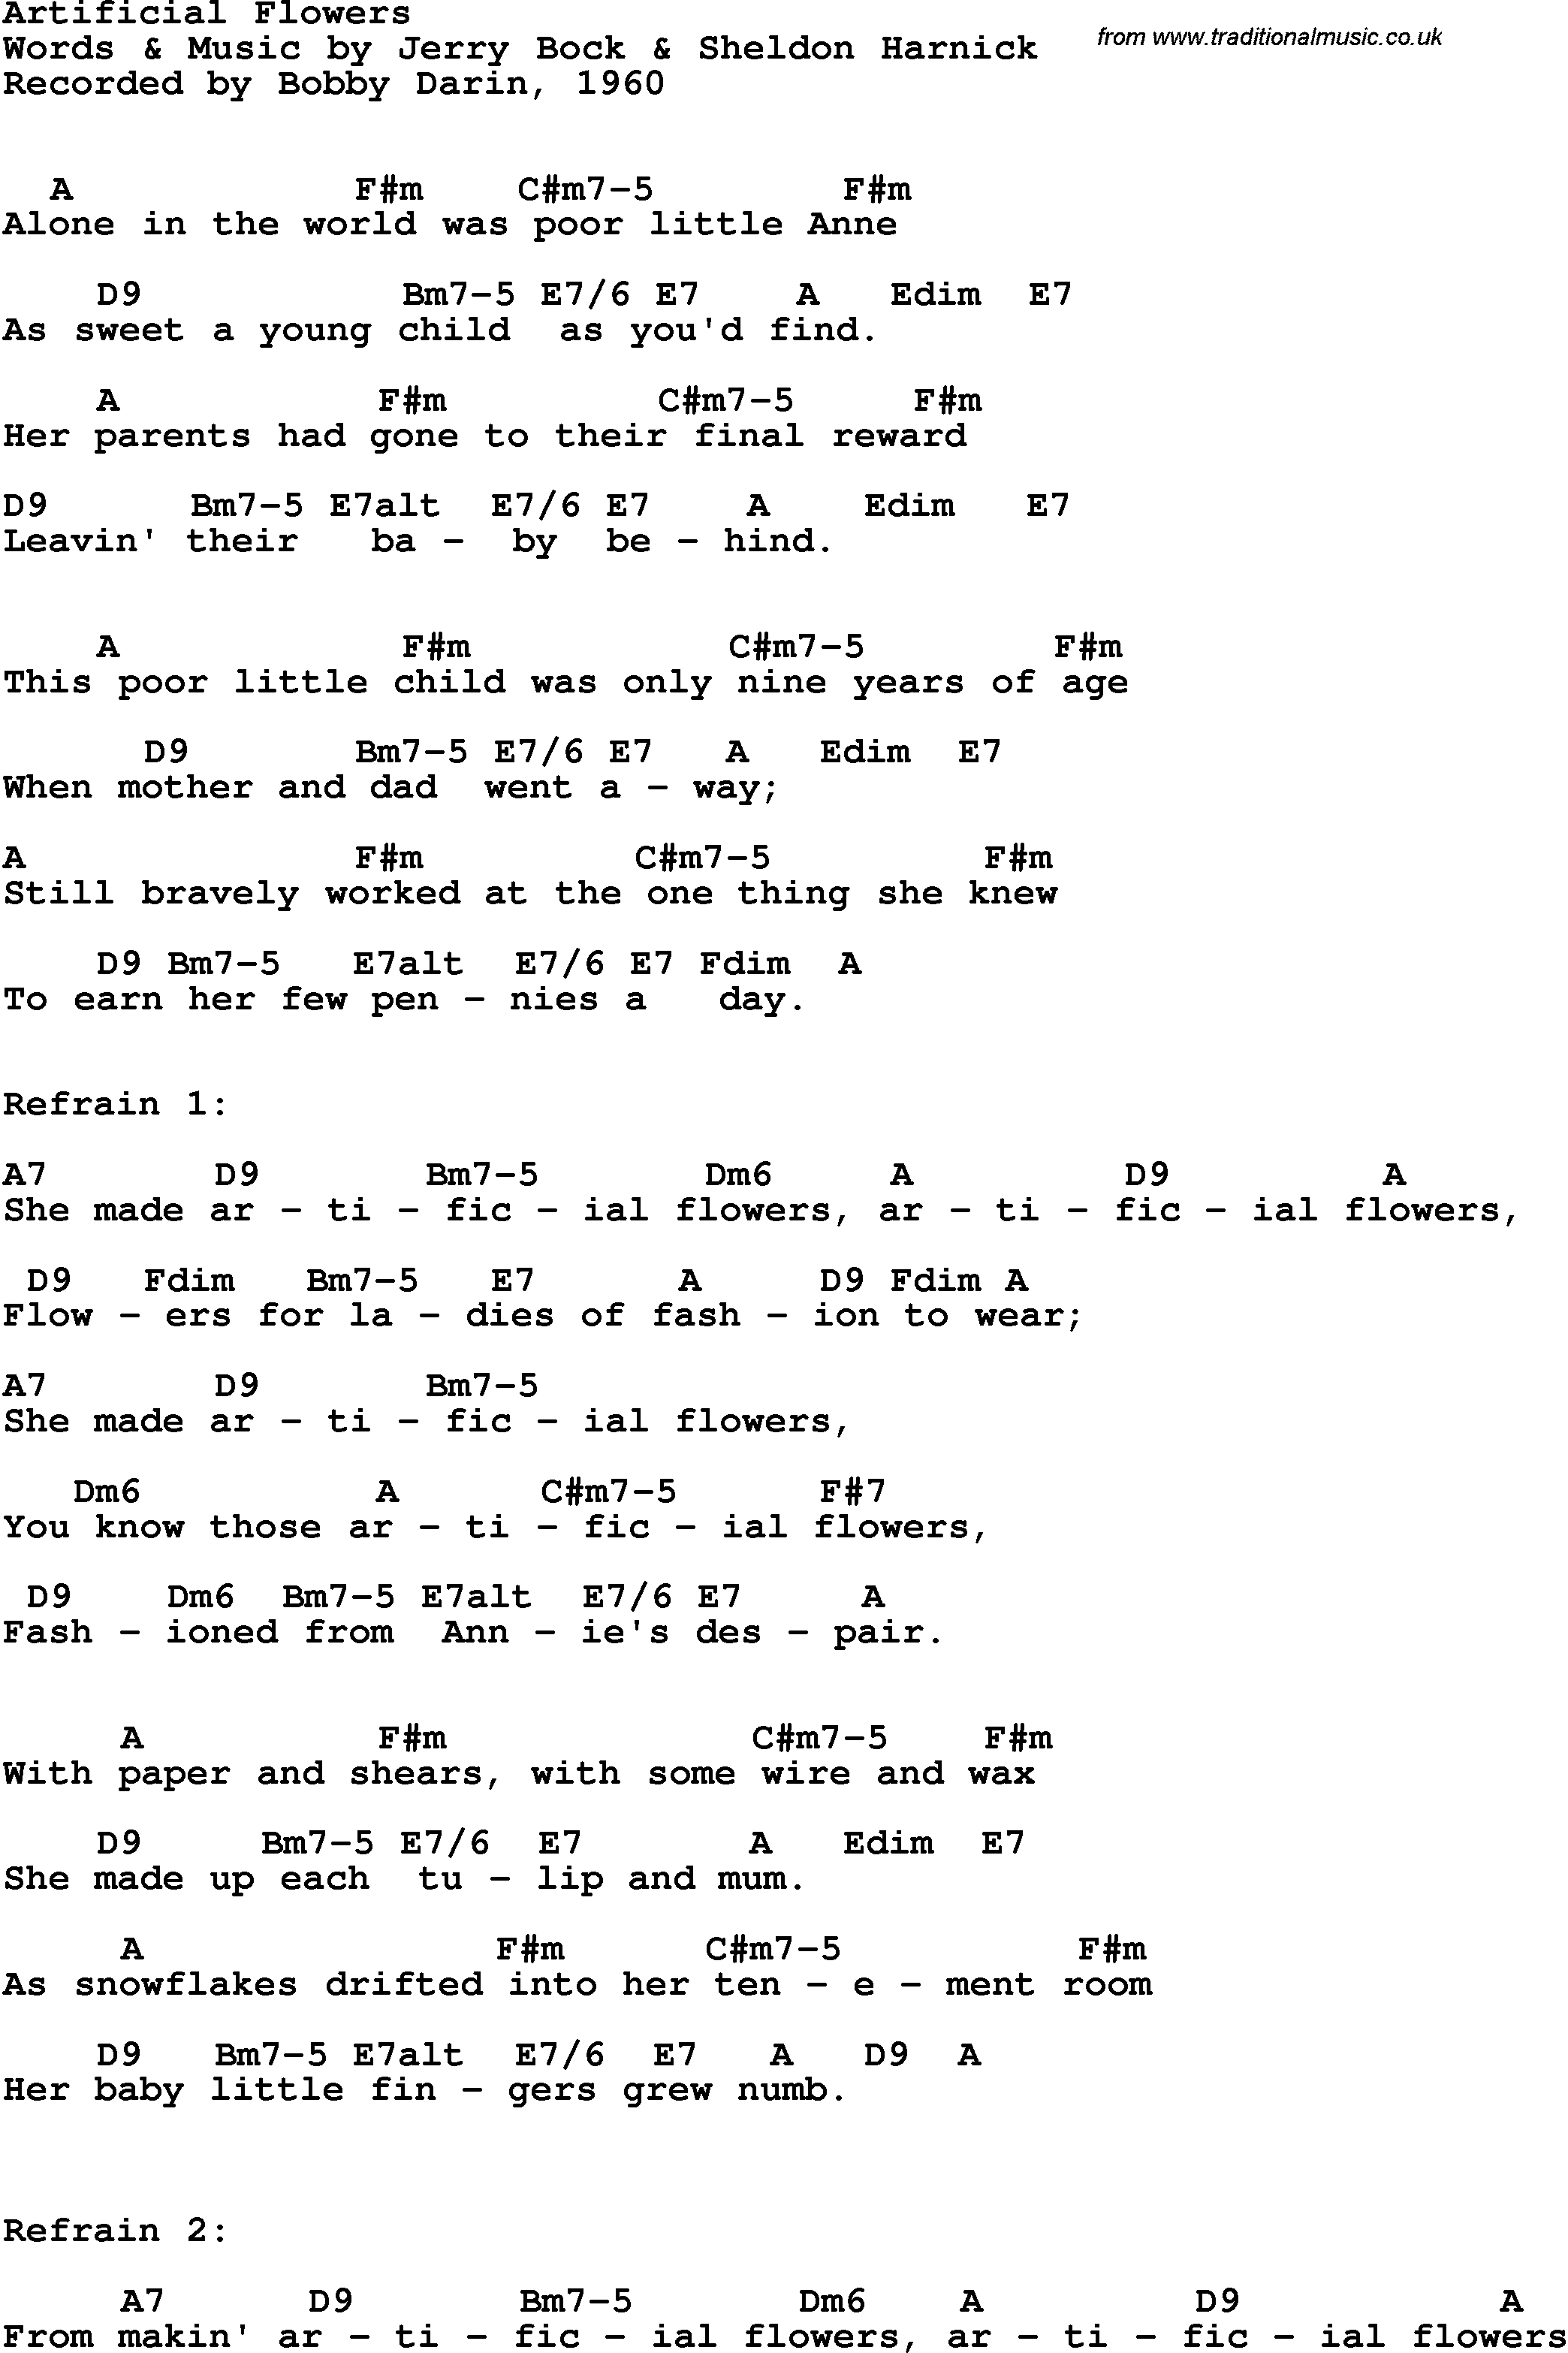 Song Lyrics with guitar chords for Artificial Flowers - Bobby Darin, 1960